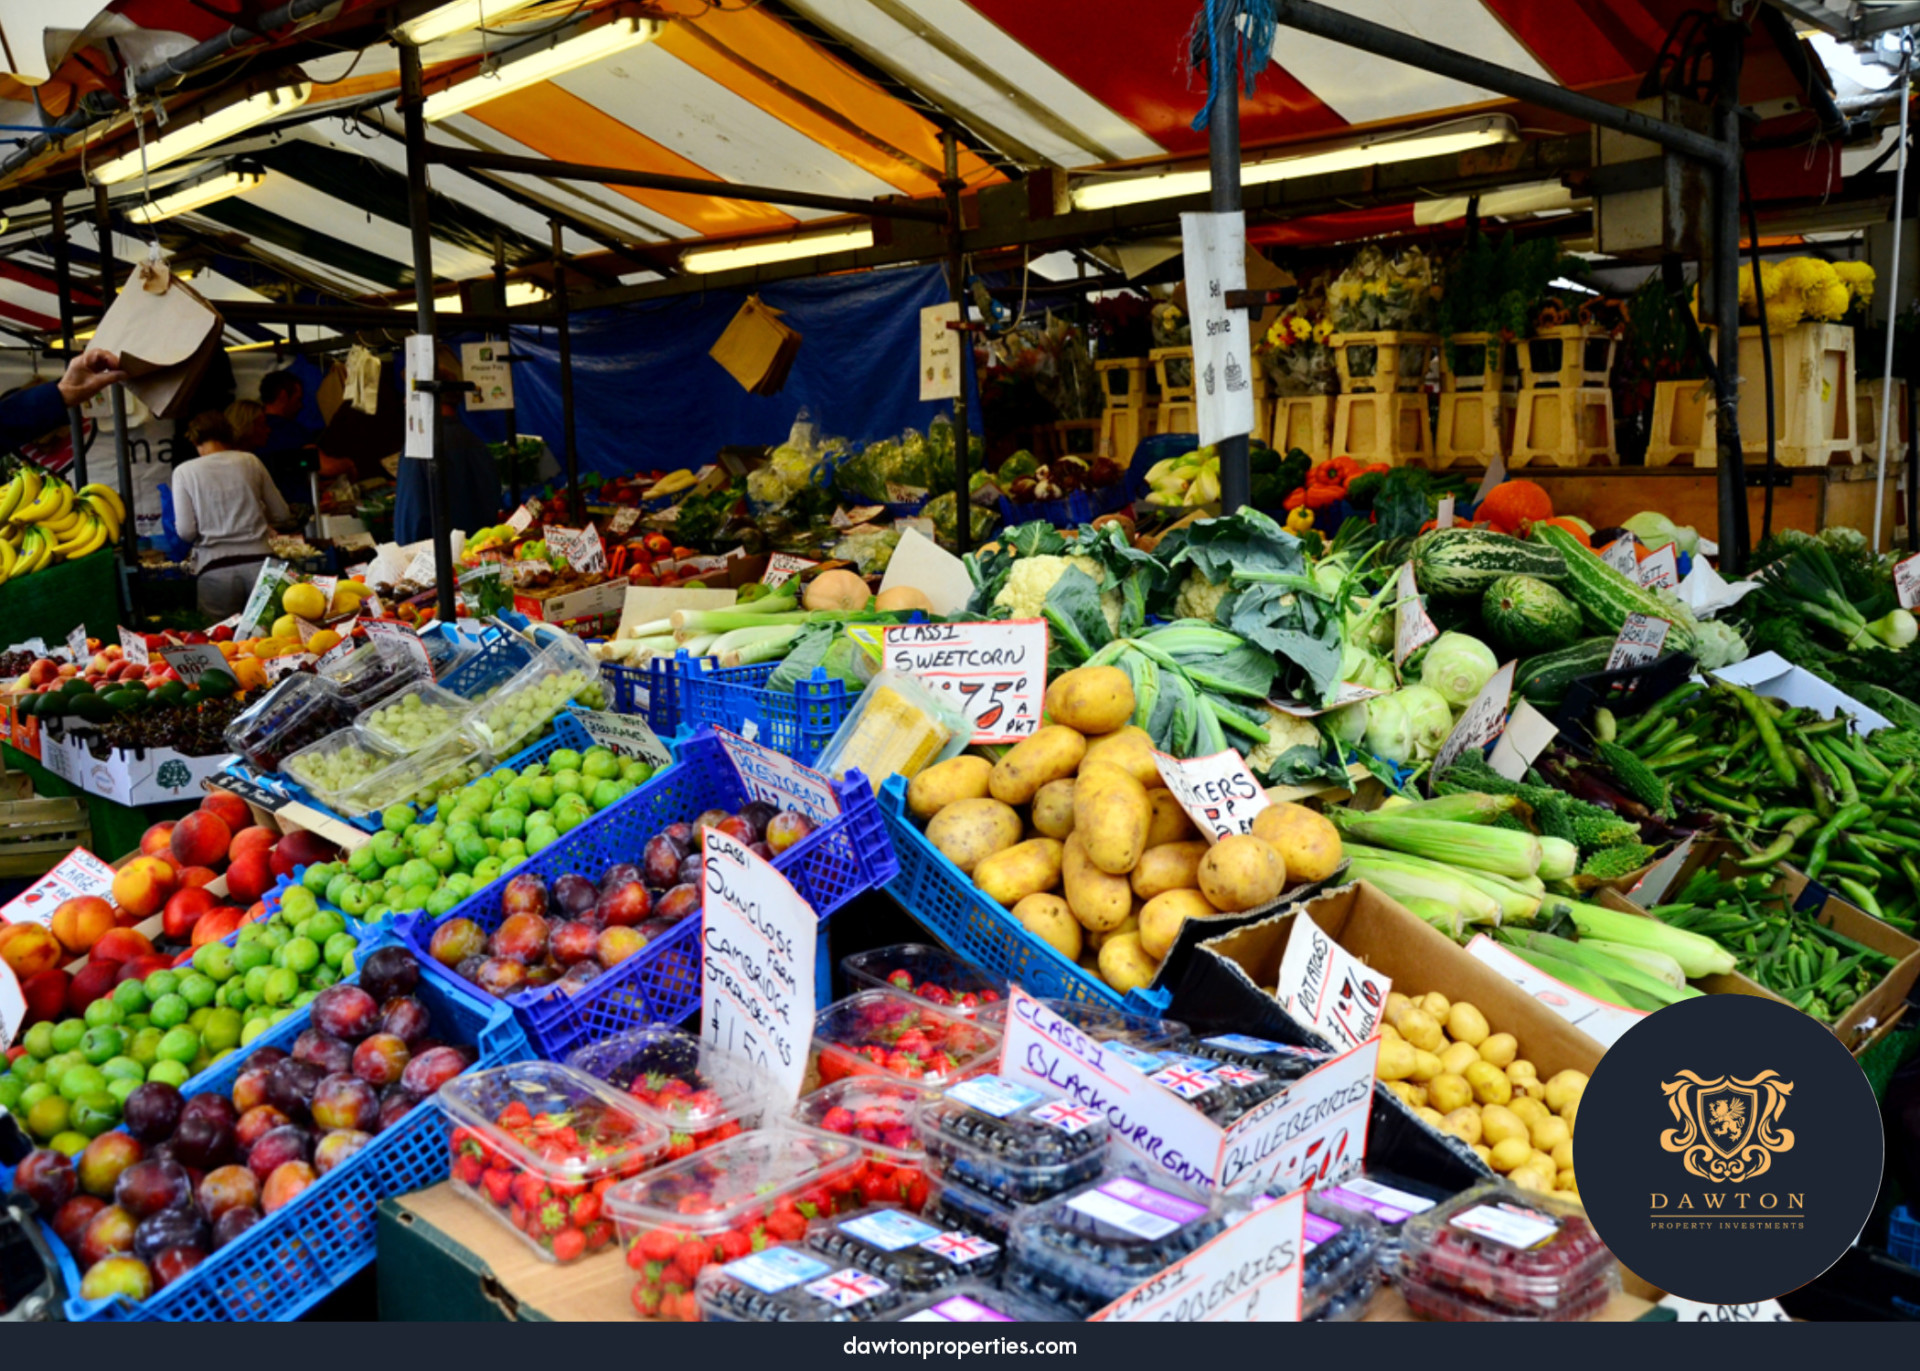 What to Buy at the Cambridge Farmers Market | Dawton Properties